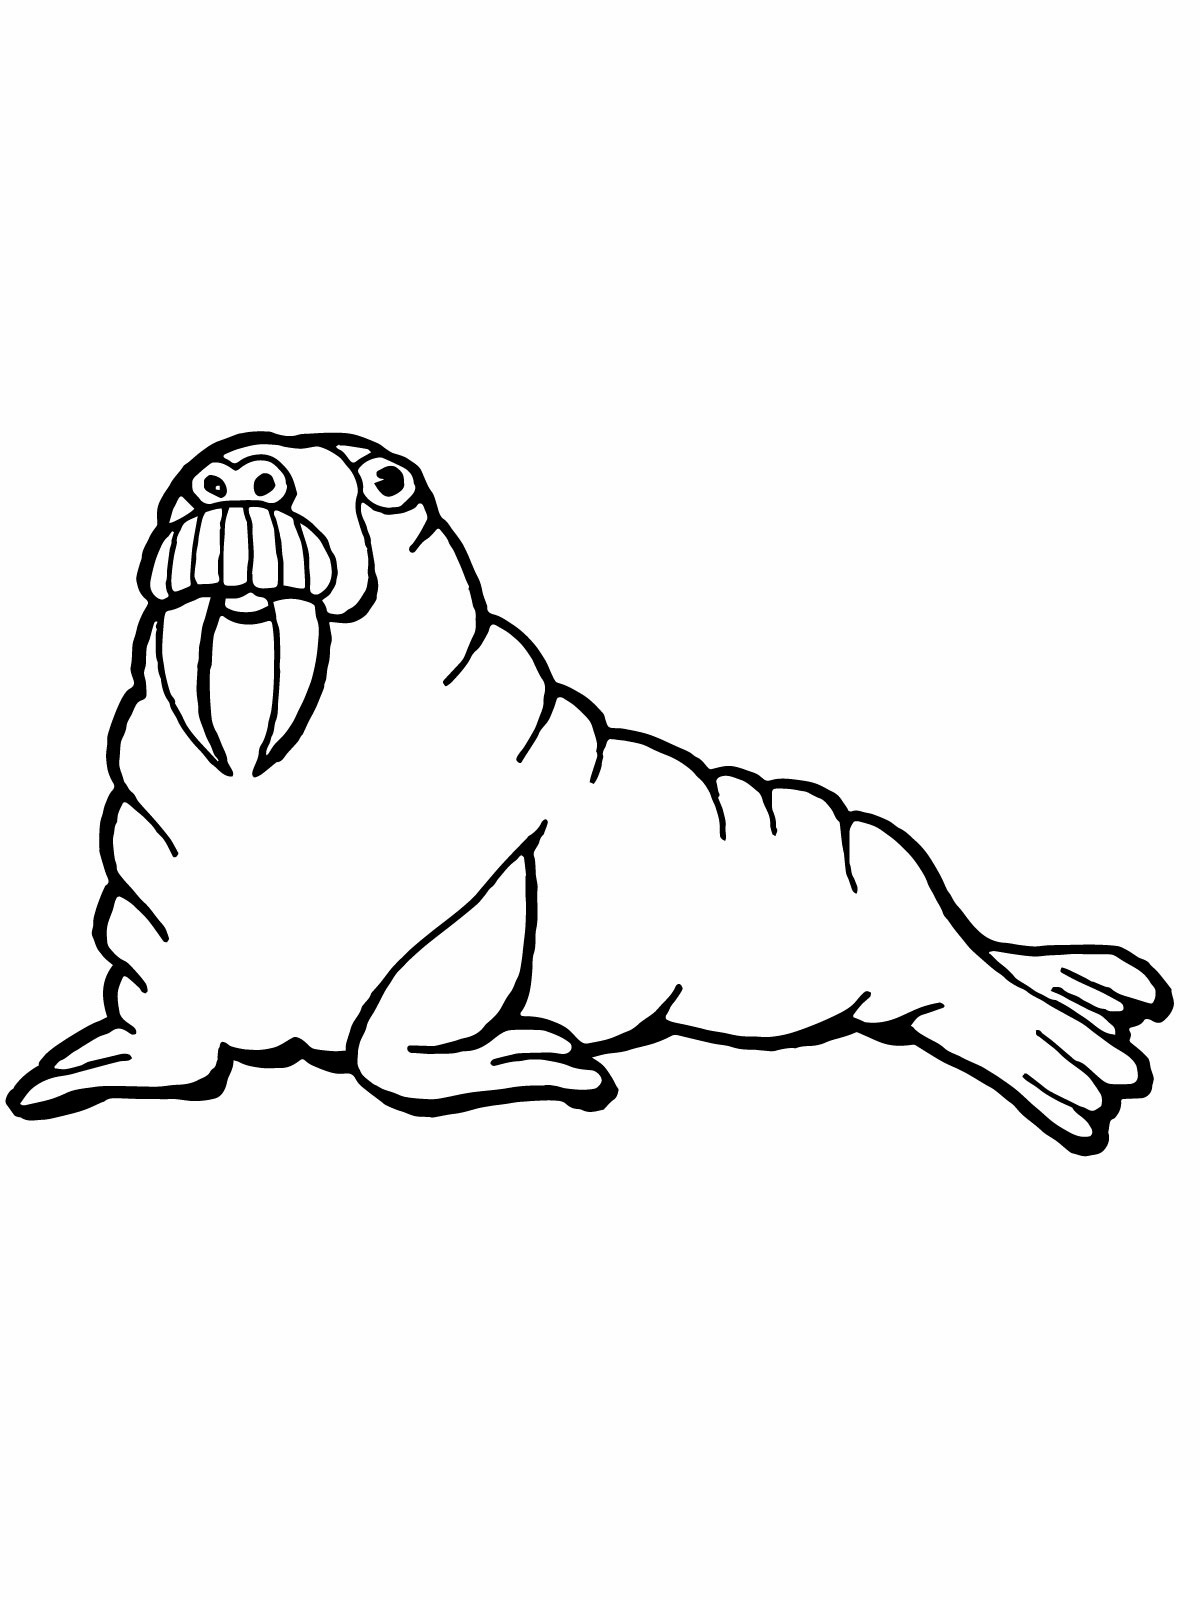 walrus pictures to print free printable walrus coloring pages for kids pictures to walrus print 